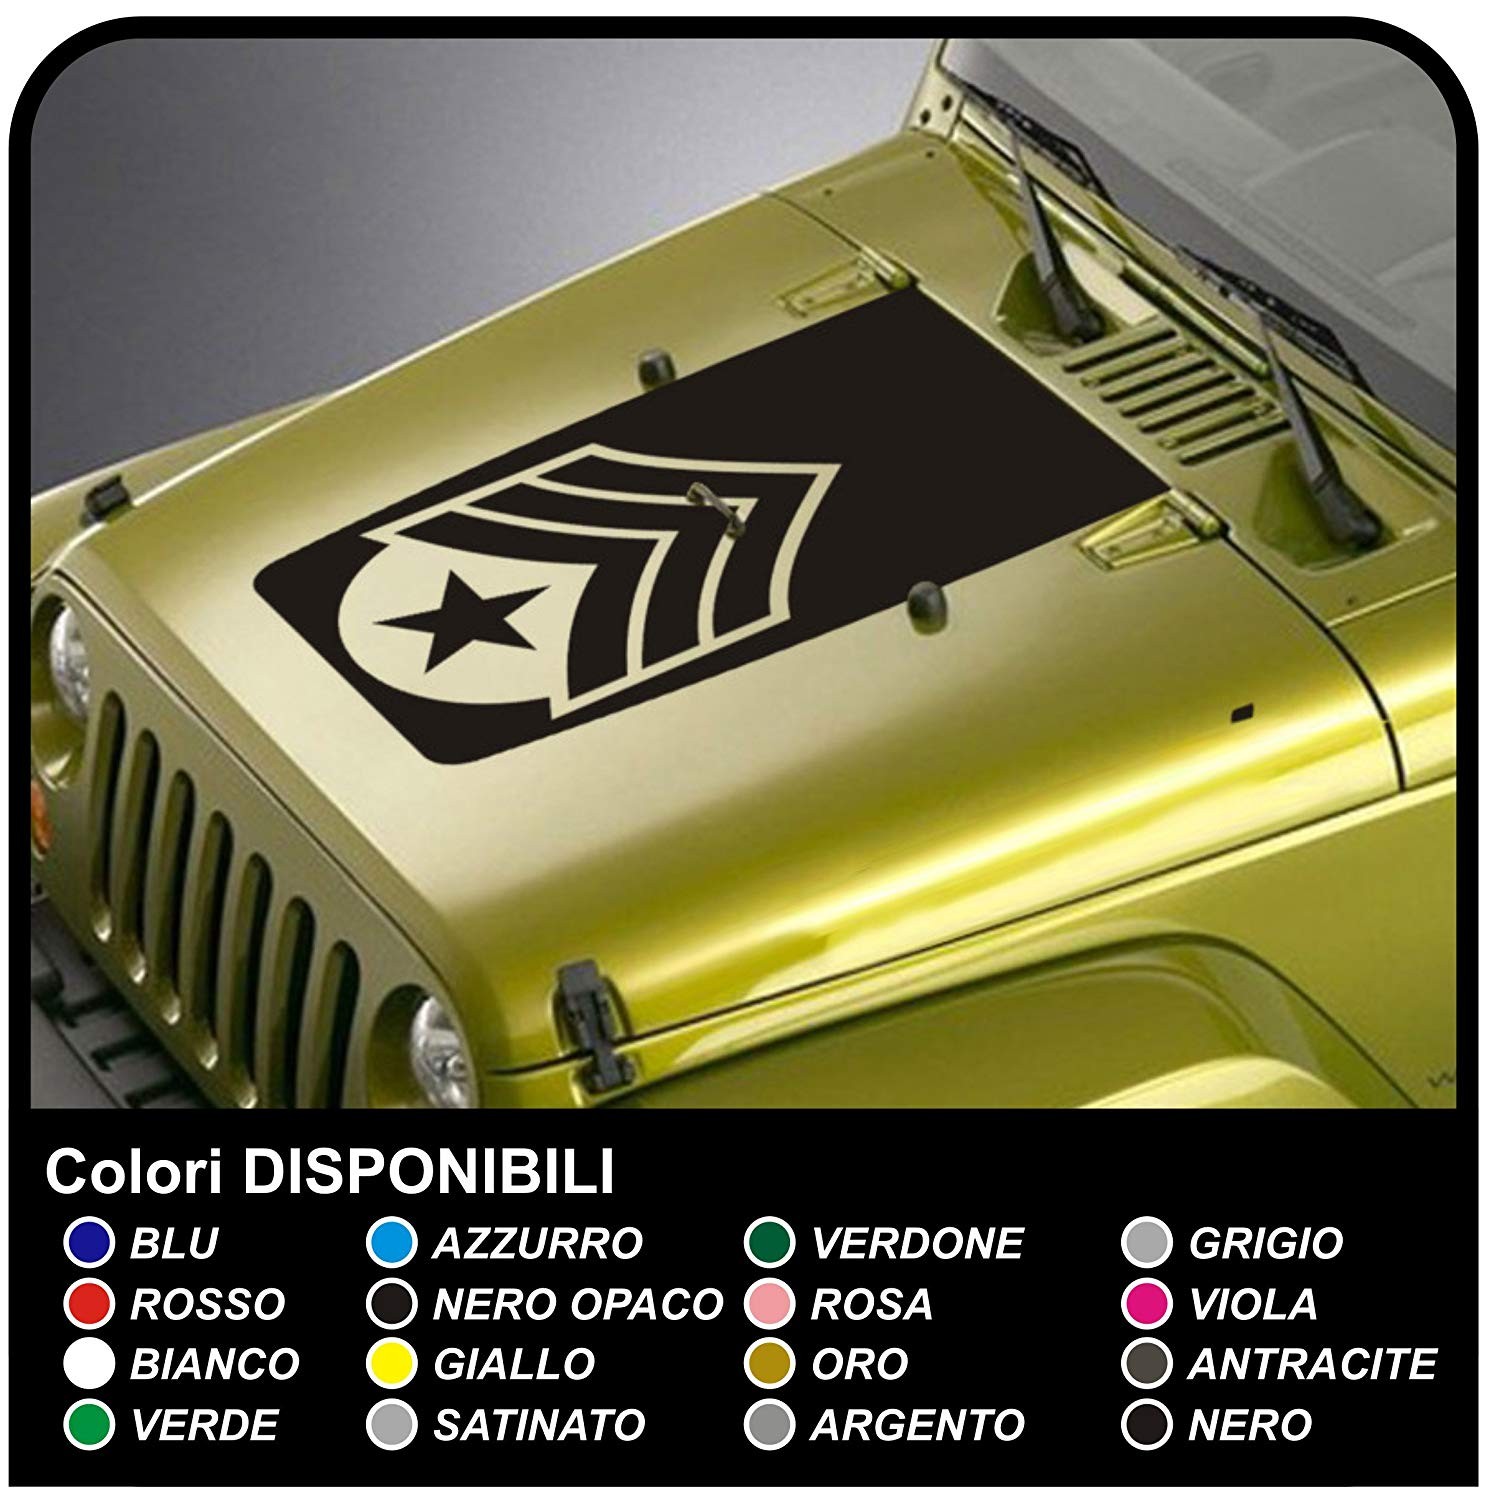 Adhesive hood for jeep renegade star consumed sgt sergeant sticker for jeep wrangler  Trailhawk 4x4